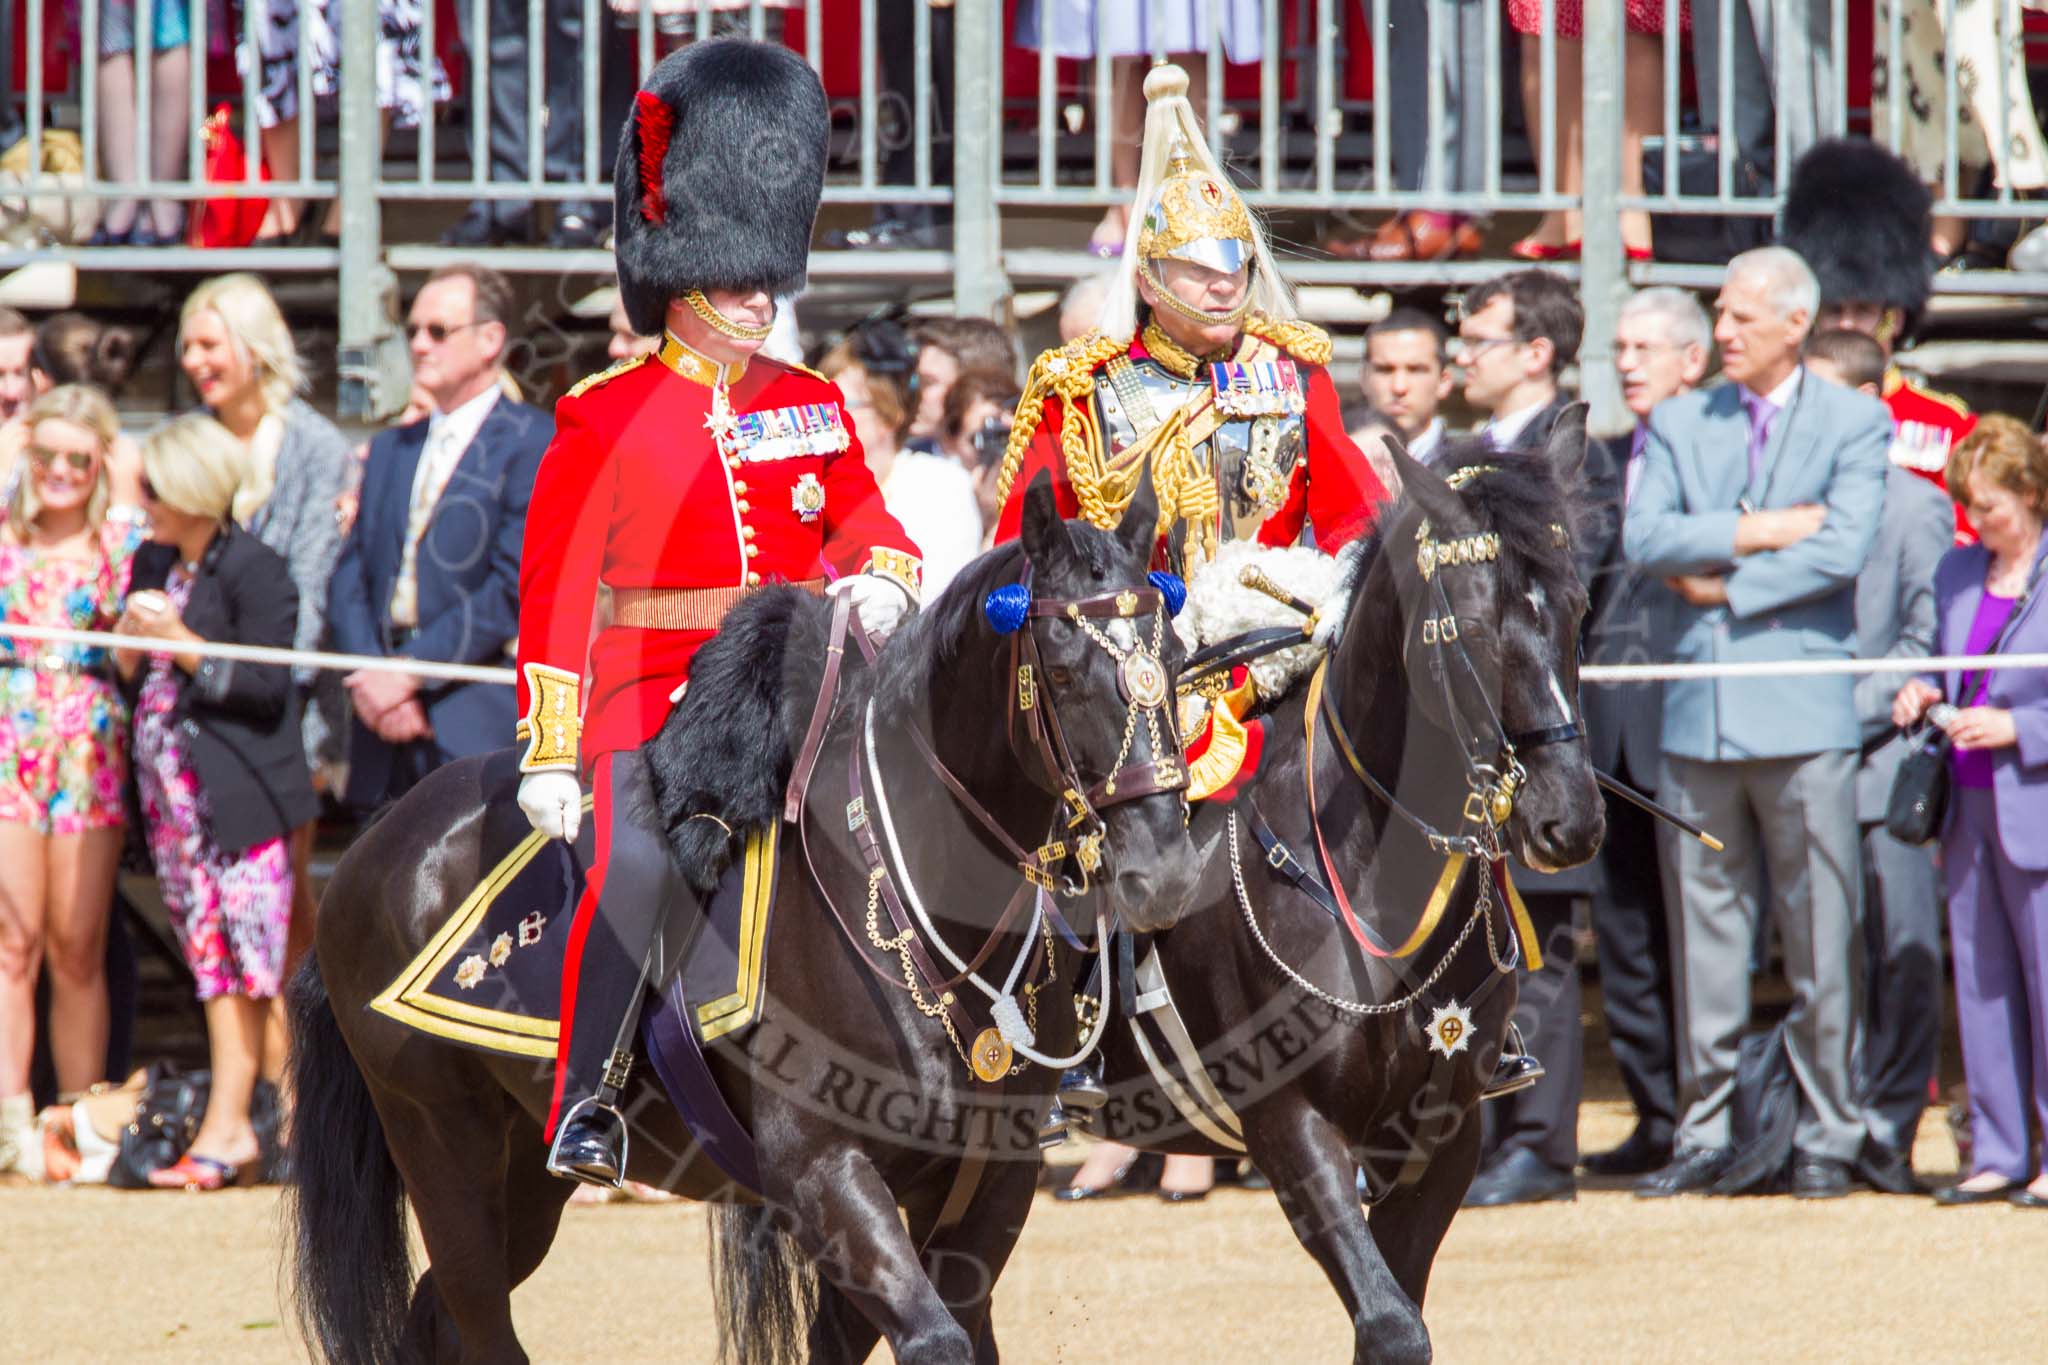 Trooping the Colour 2013: The Non-Royal Colonels, Colonel Coldstream Guards General Sir James Bucknall and Gold Stick in Waiting and Colonel Life Guards, Field Marshal the Lord Guthrie of Craigiebank. Image #283, 15 June 2013 10:59 Horse Guards Parade, London, UK